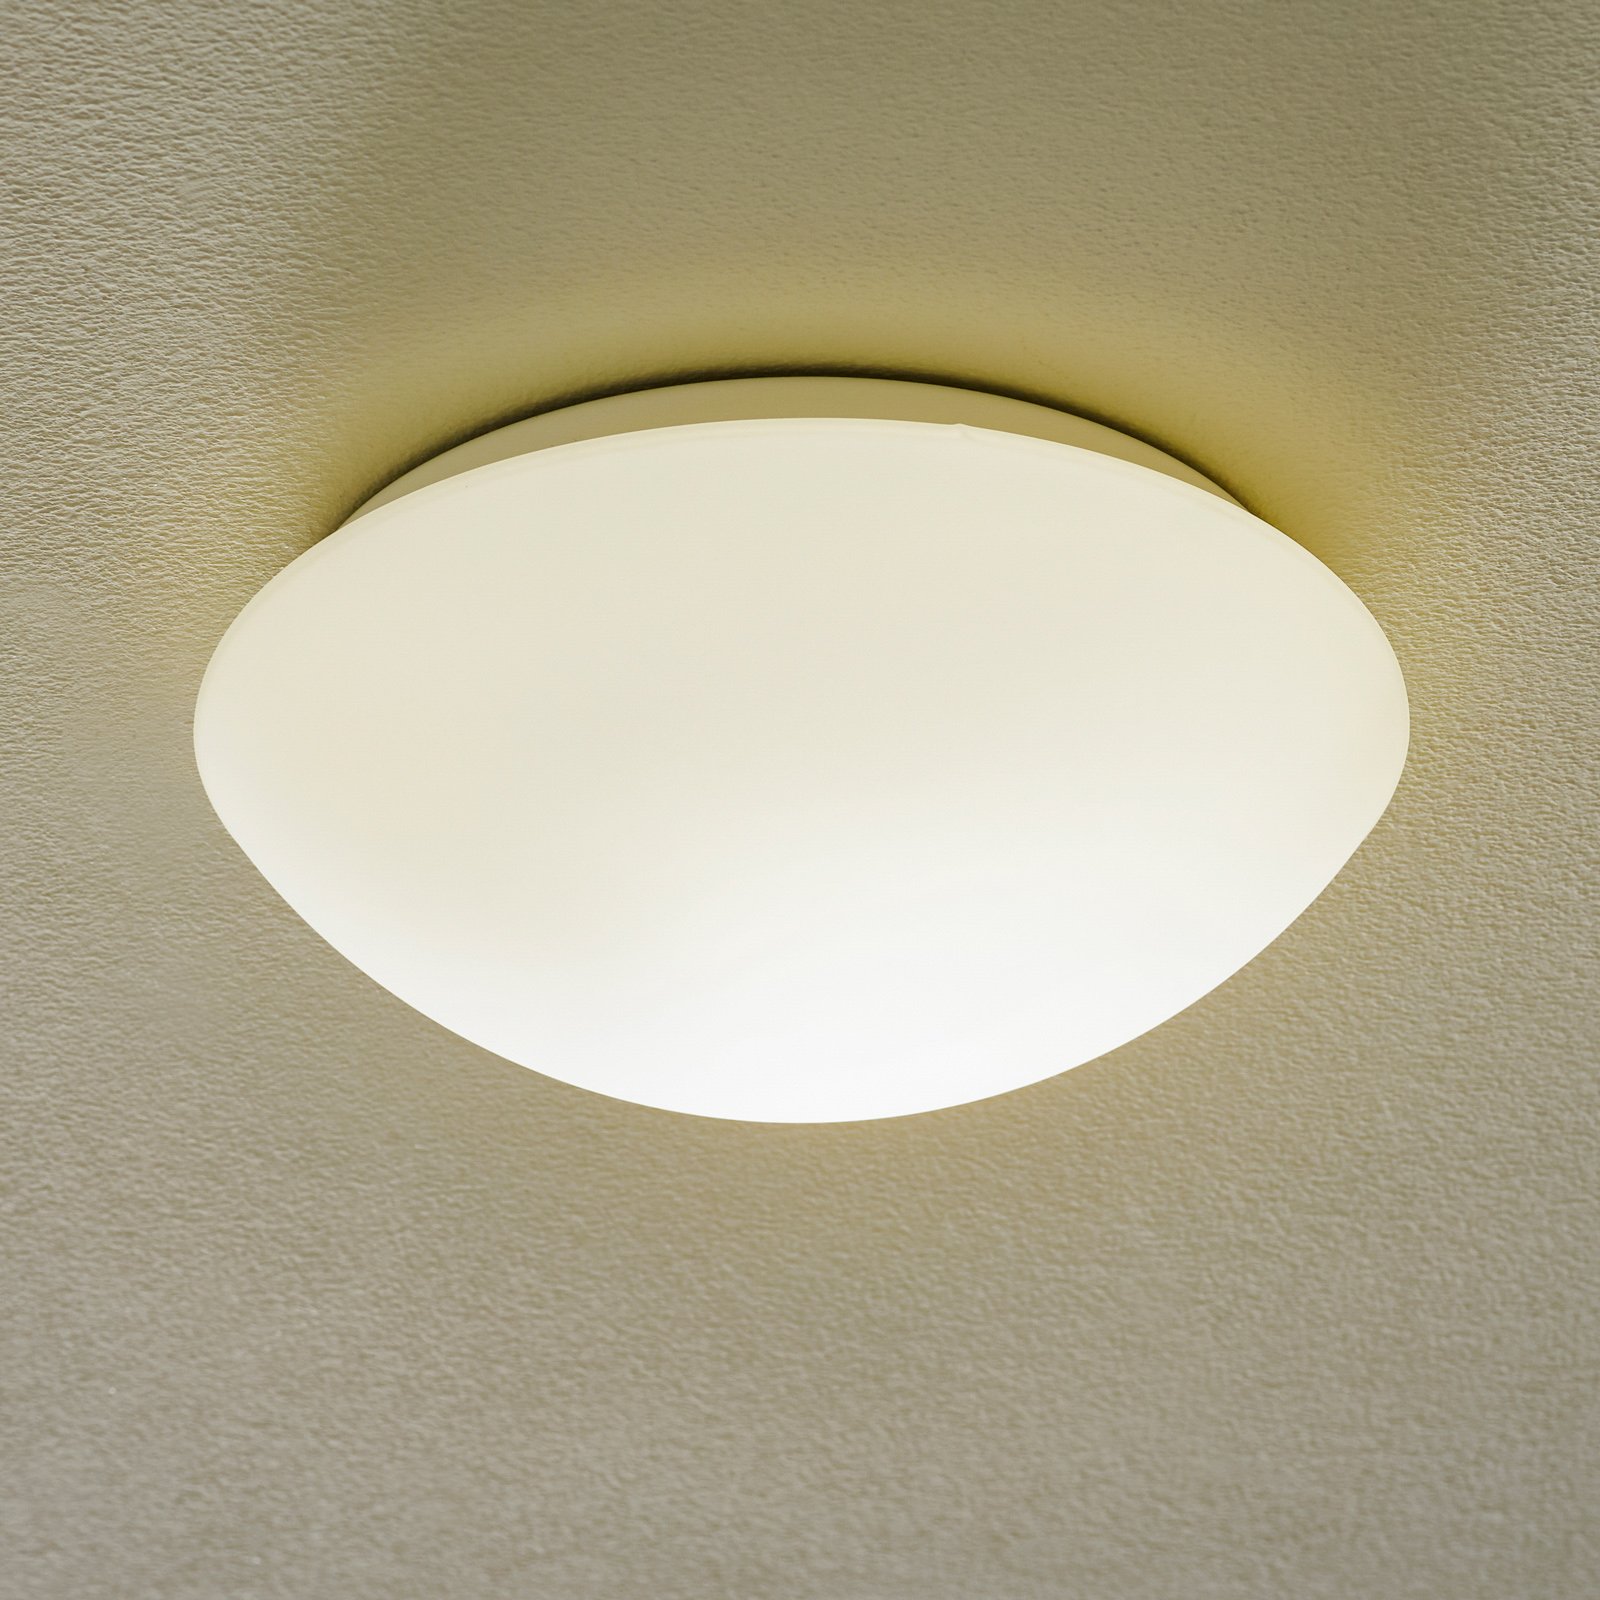 STEINEL RS 10 L ceiling light with sensor